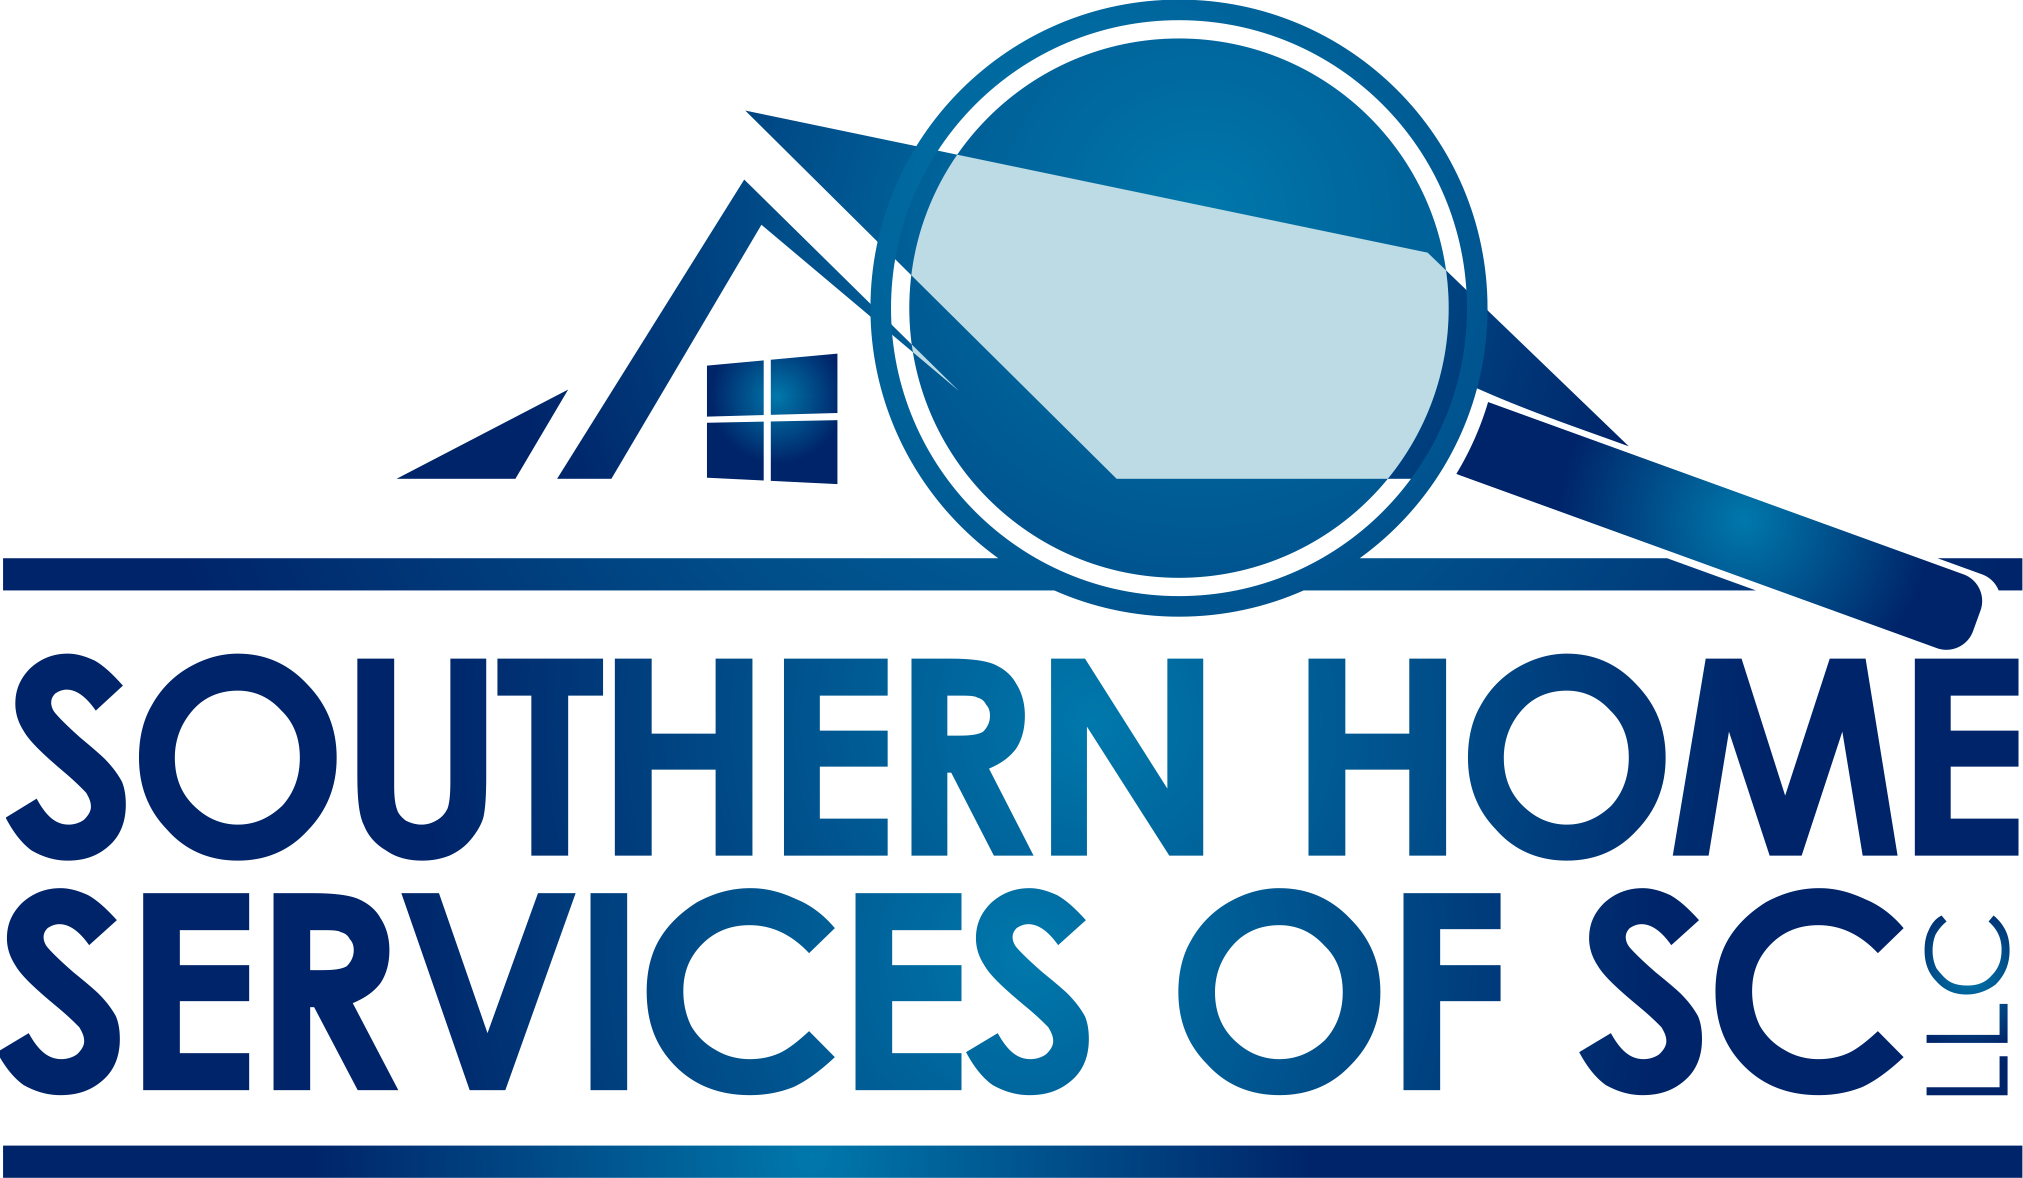 Southern Home Services of SC, LLC